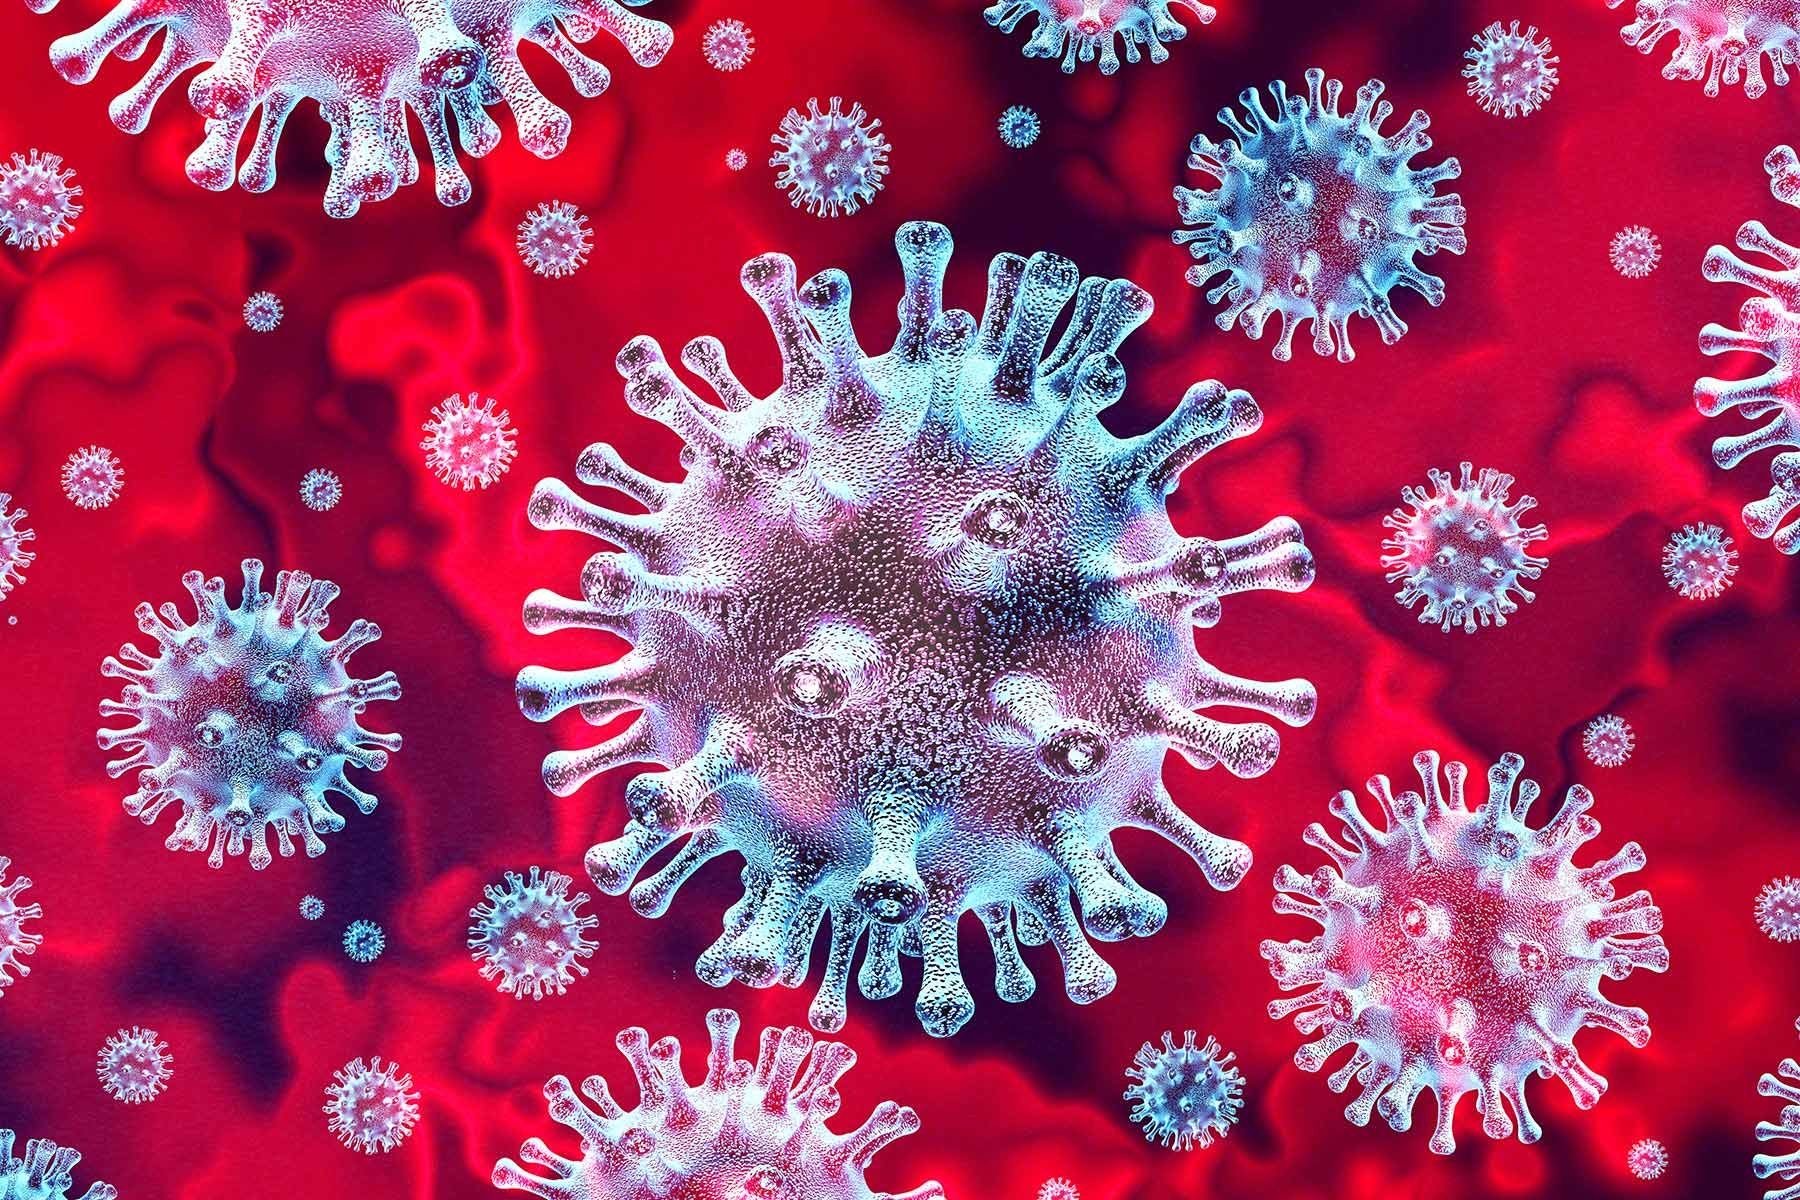 VIew Of COVID-19 Virus From A Microscope